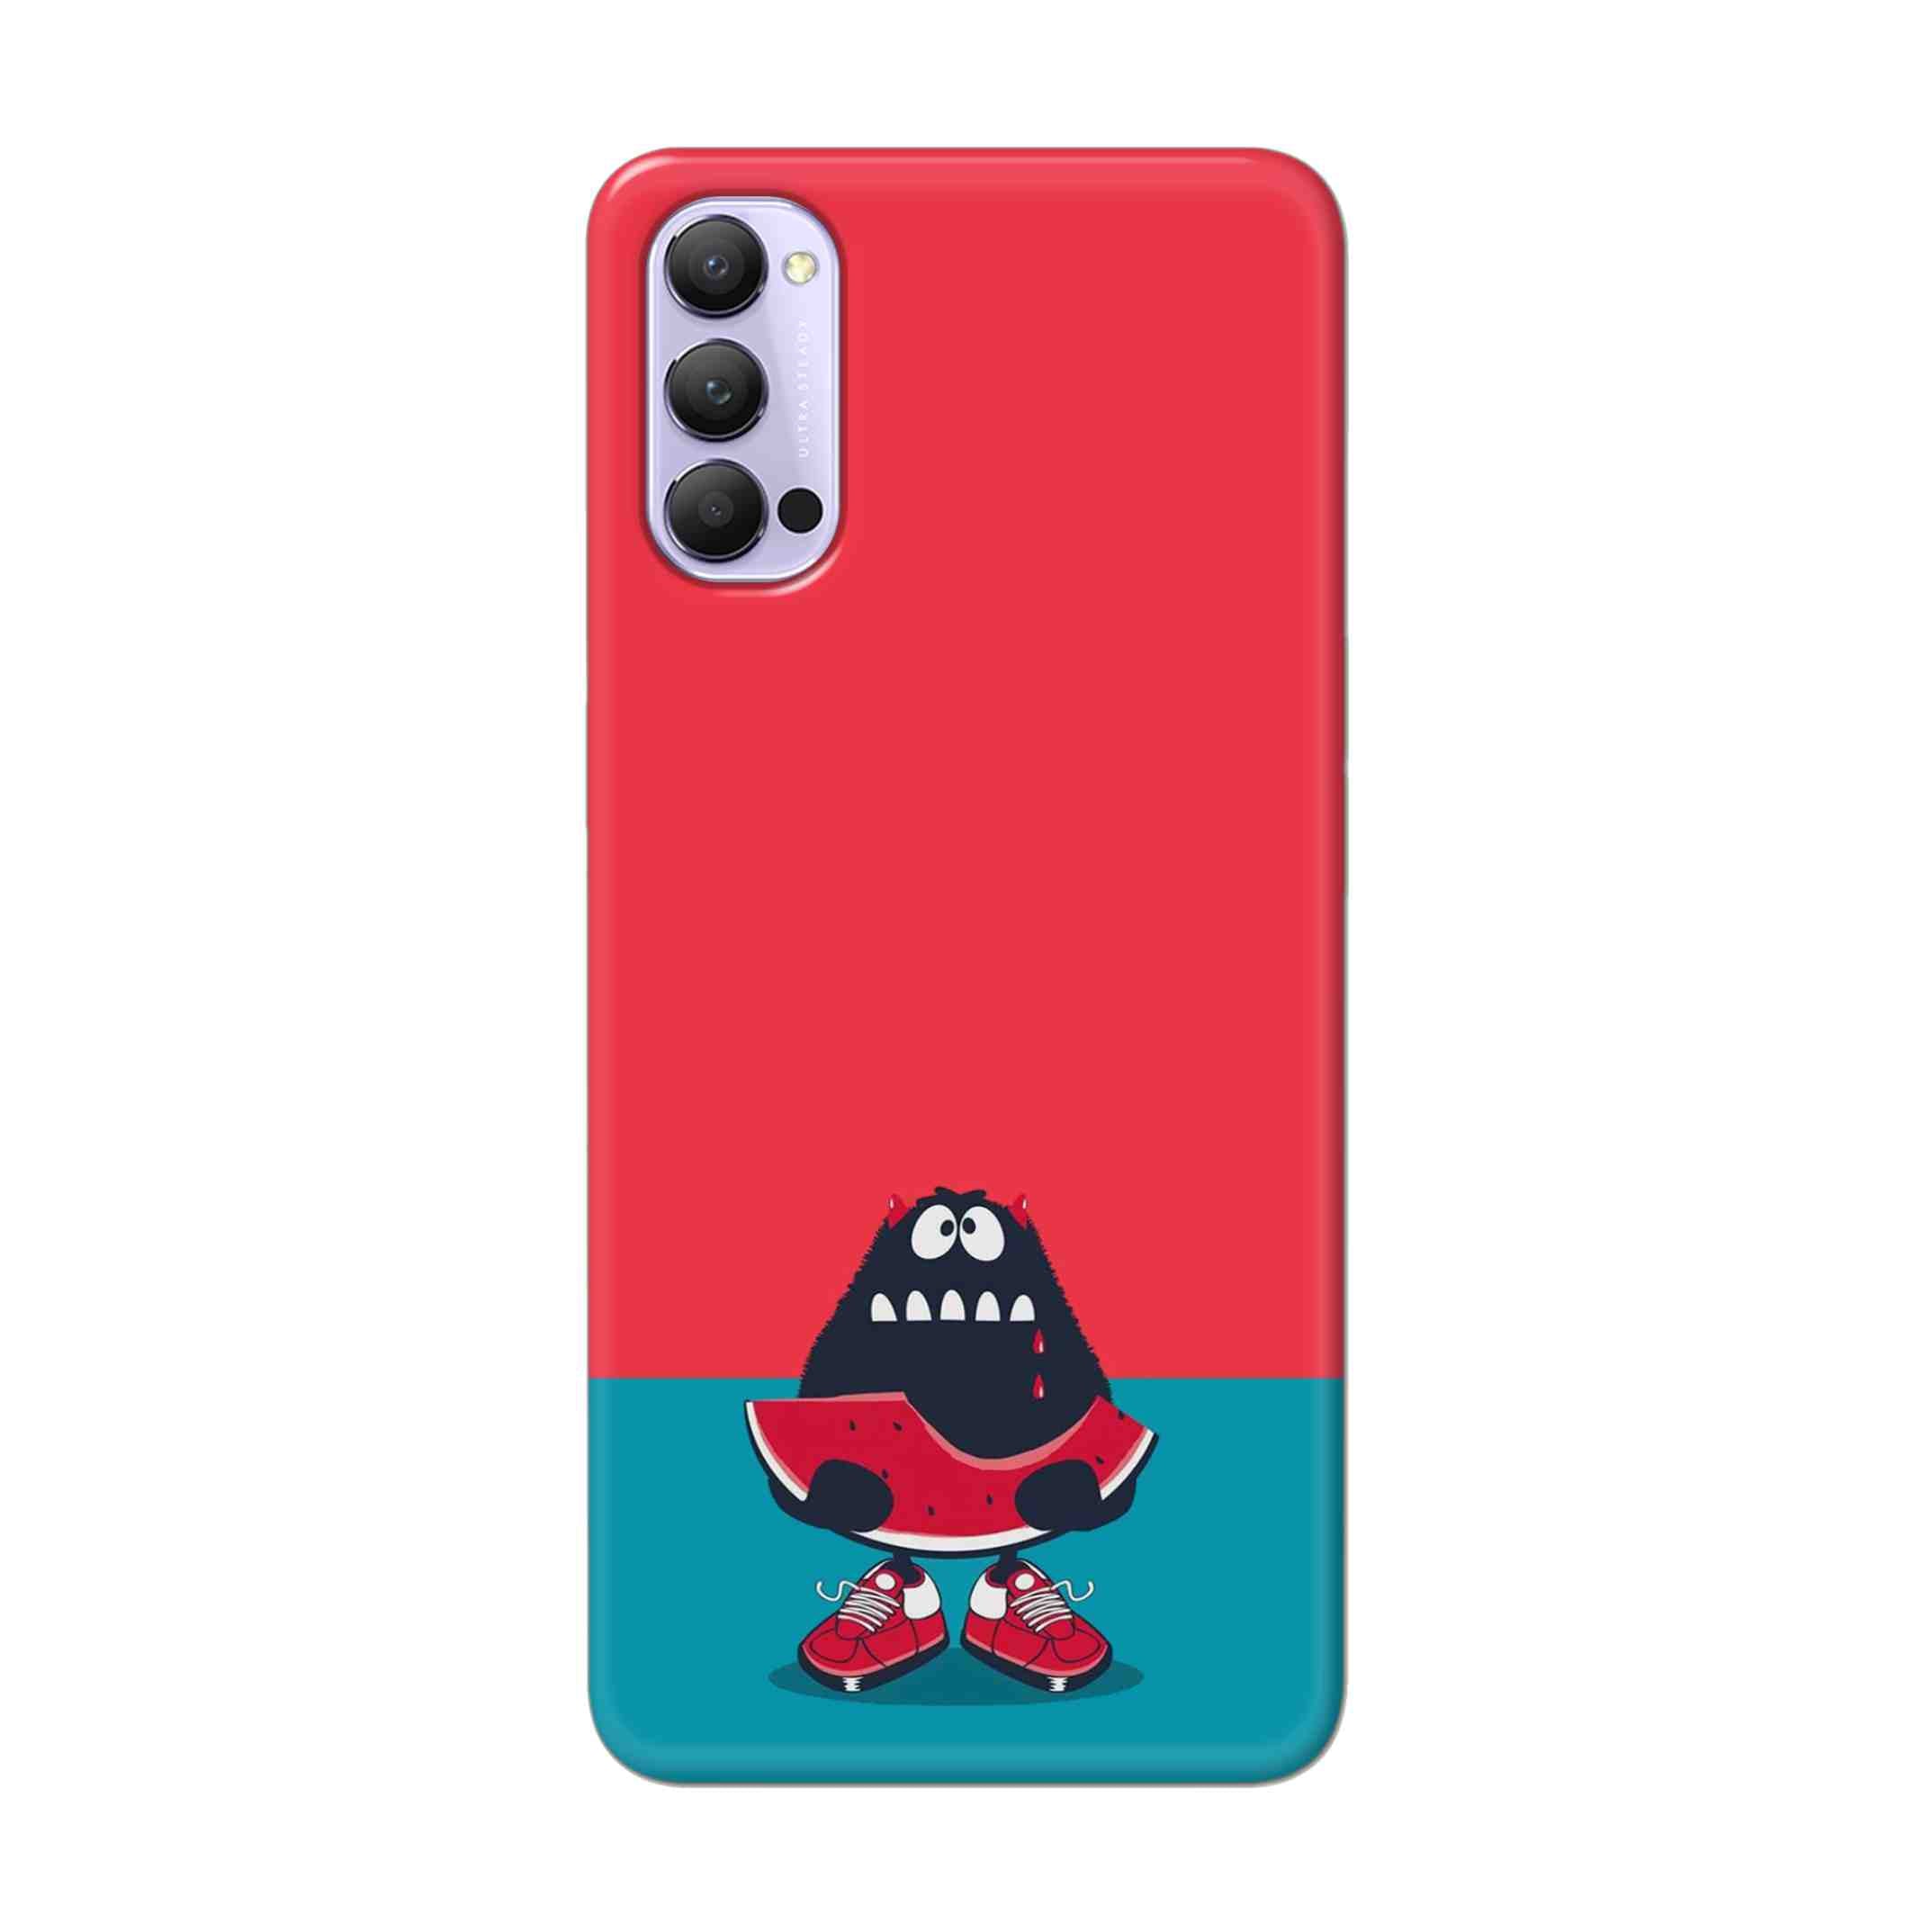 Buy Watermelon Hard Back Mobile Phone Case Cover For Oppo Reno 4 Pro Online